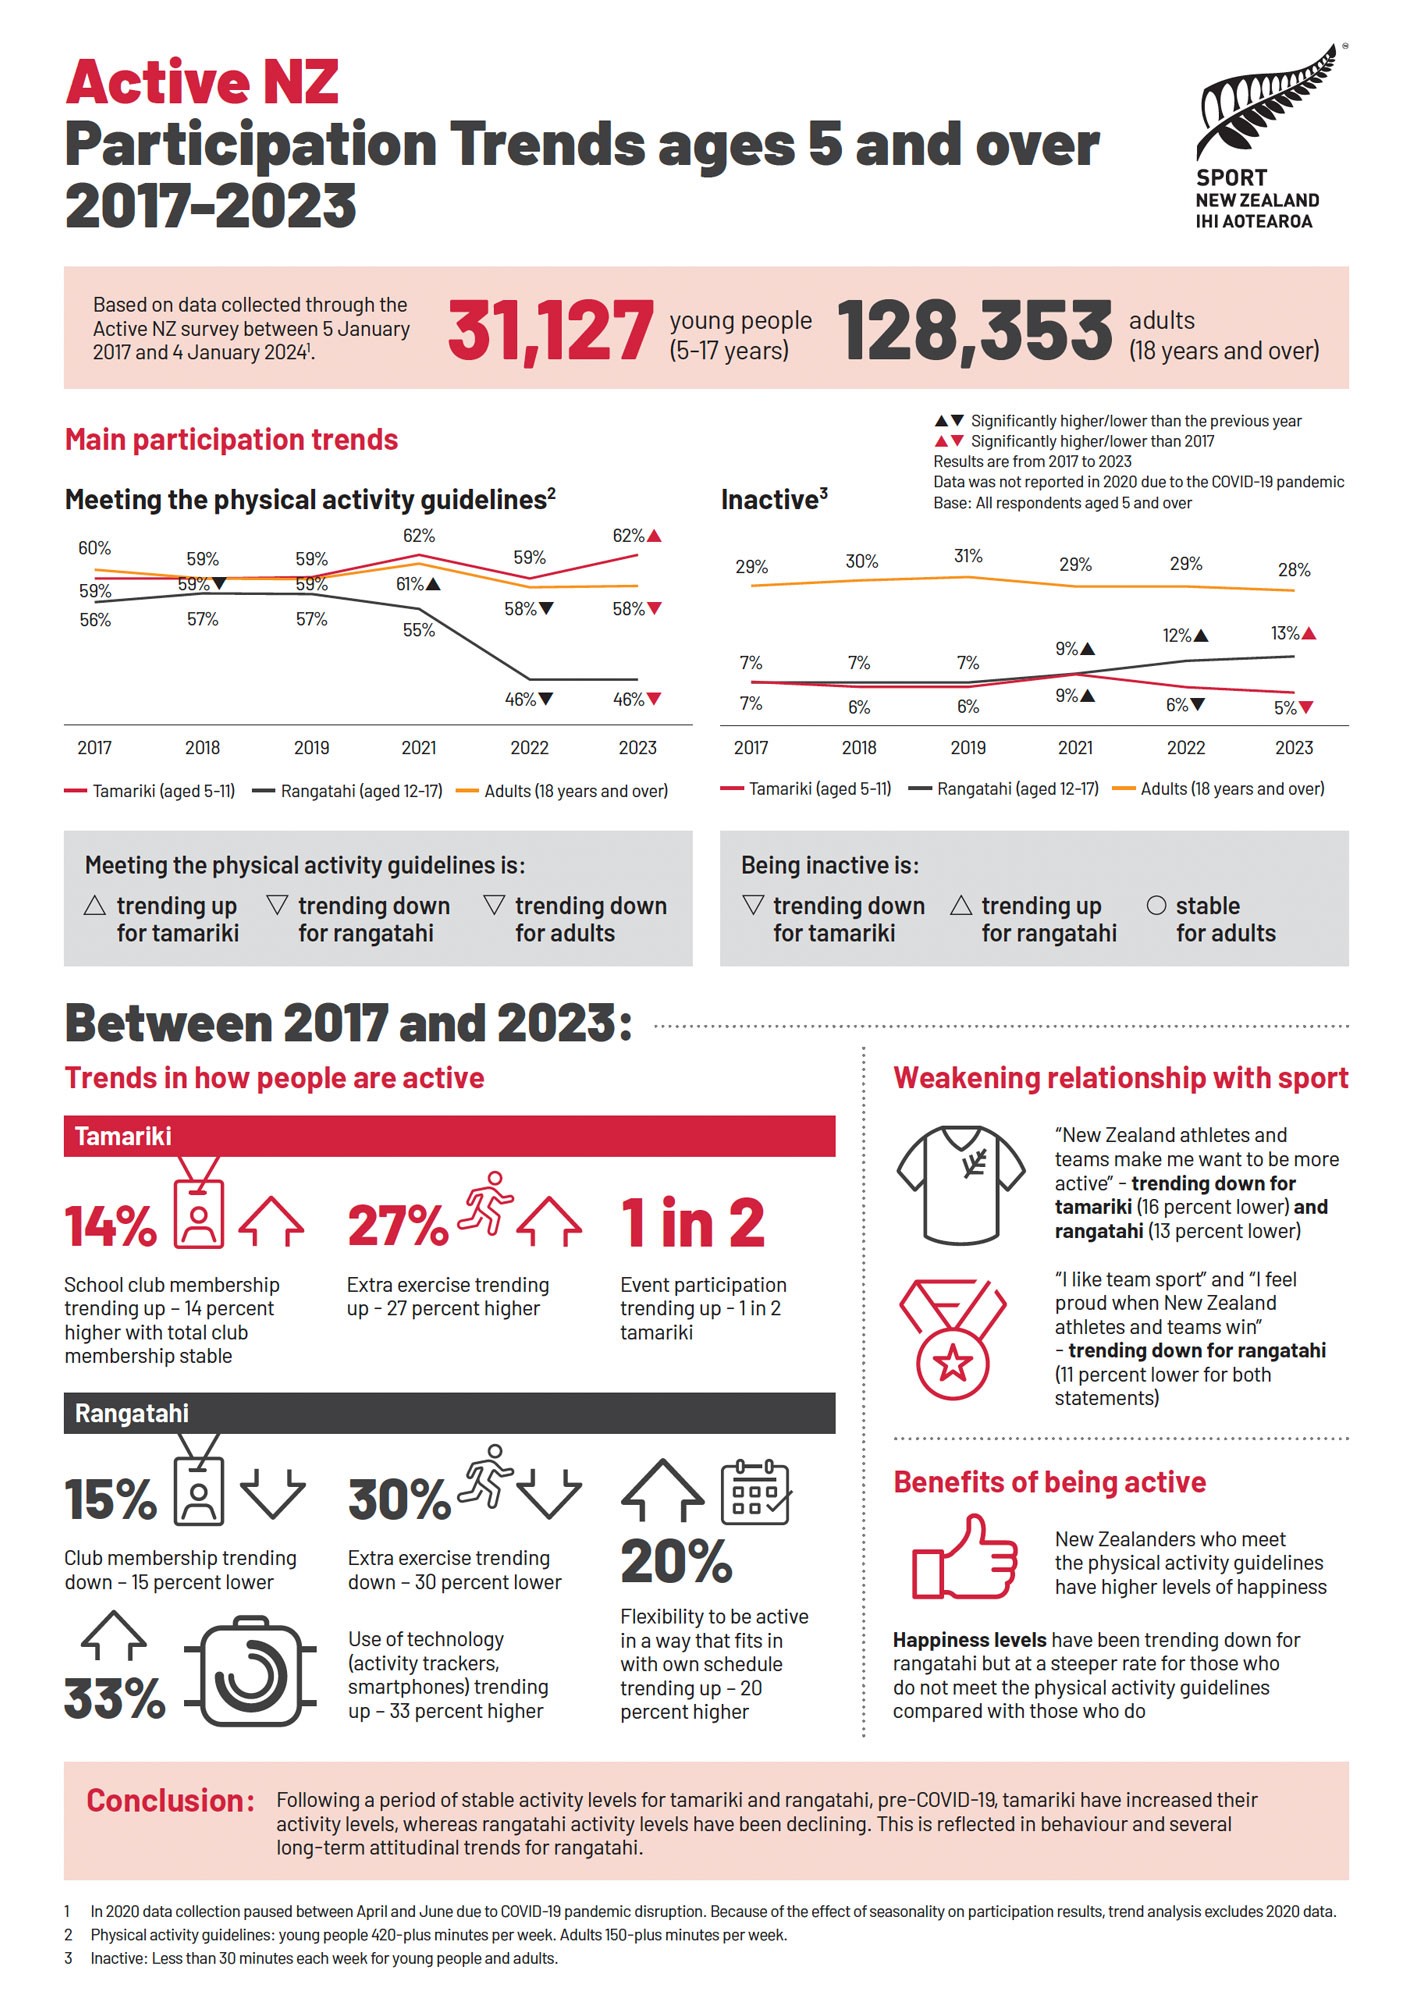 Infographic for Active NZ Participation Trends 2017-2023